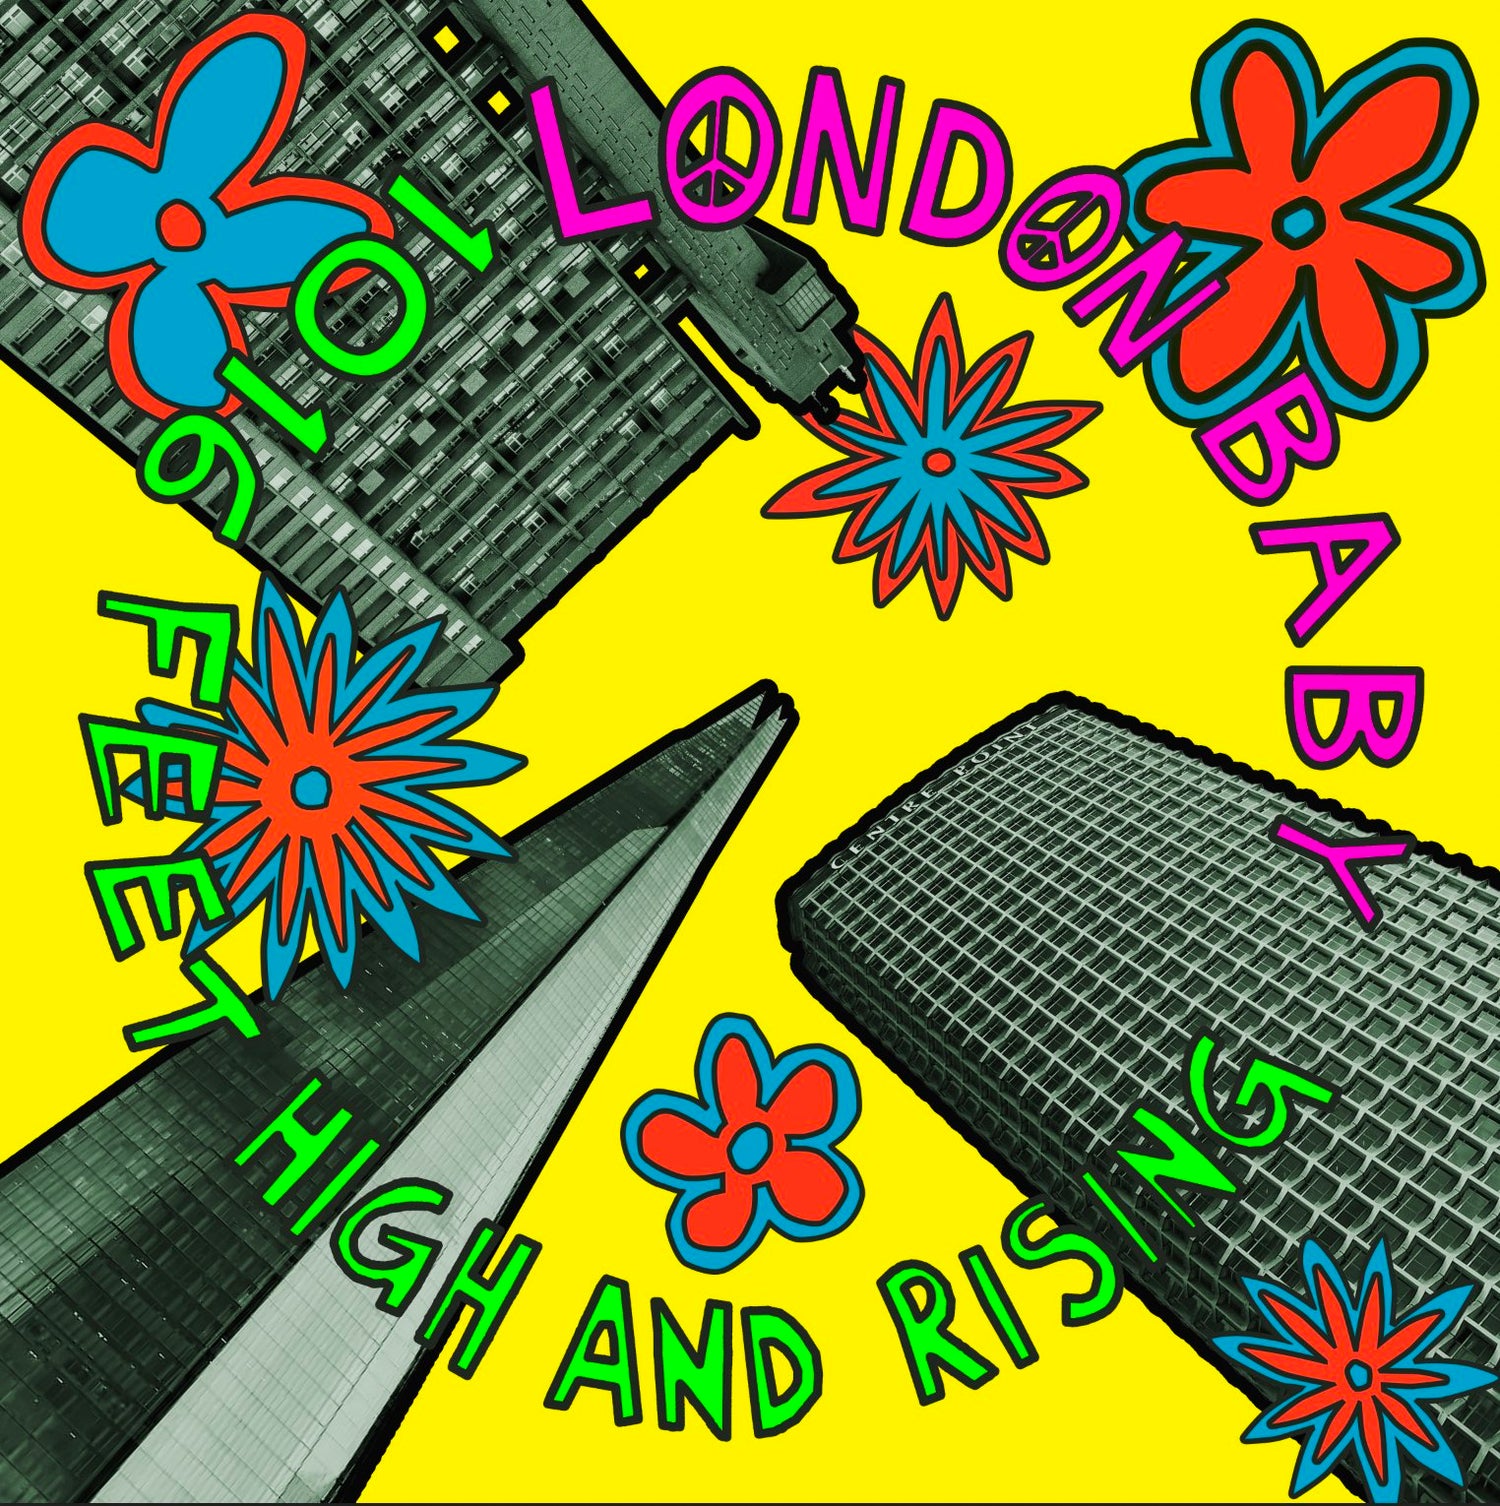 London Album Cover Remixes - Prints and Canvases